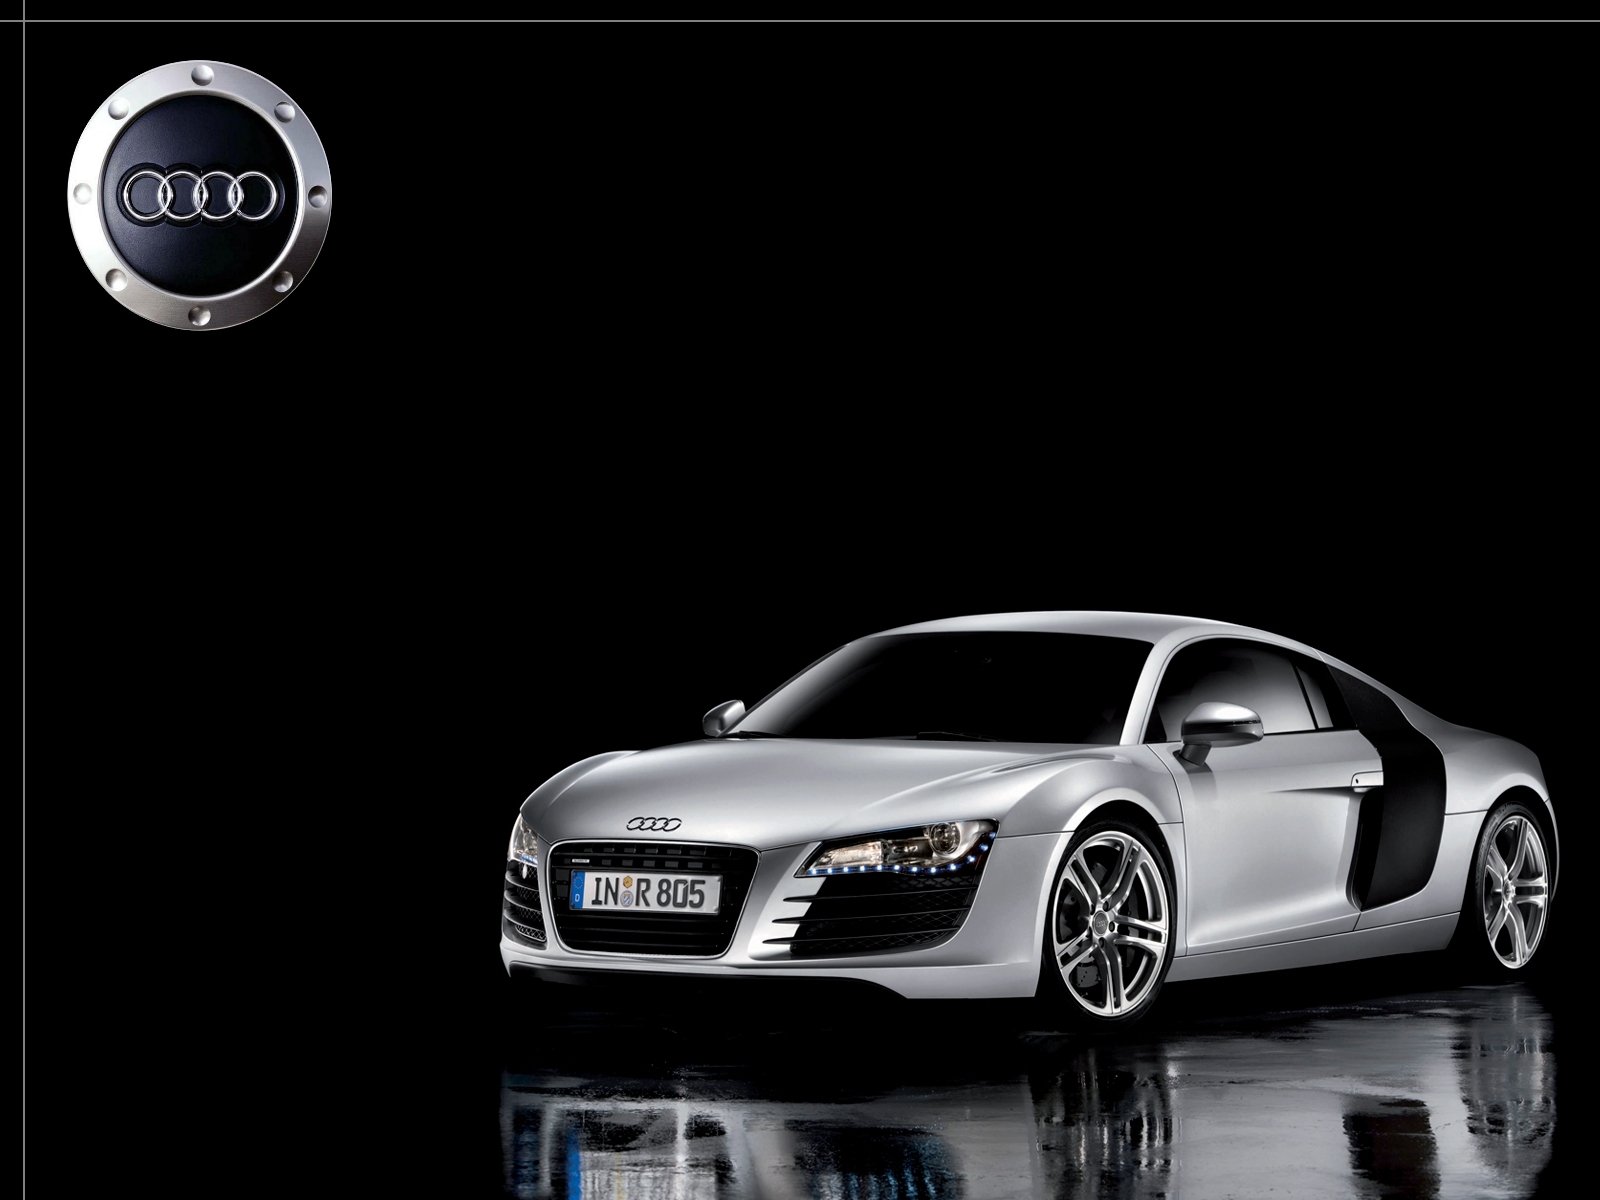  wallpapers audi r8 wallpapers audi r8 wallpapers audi r8 wallpapers 1600x1200